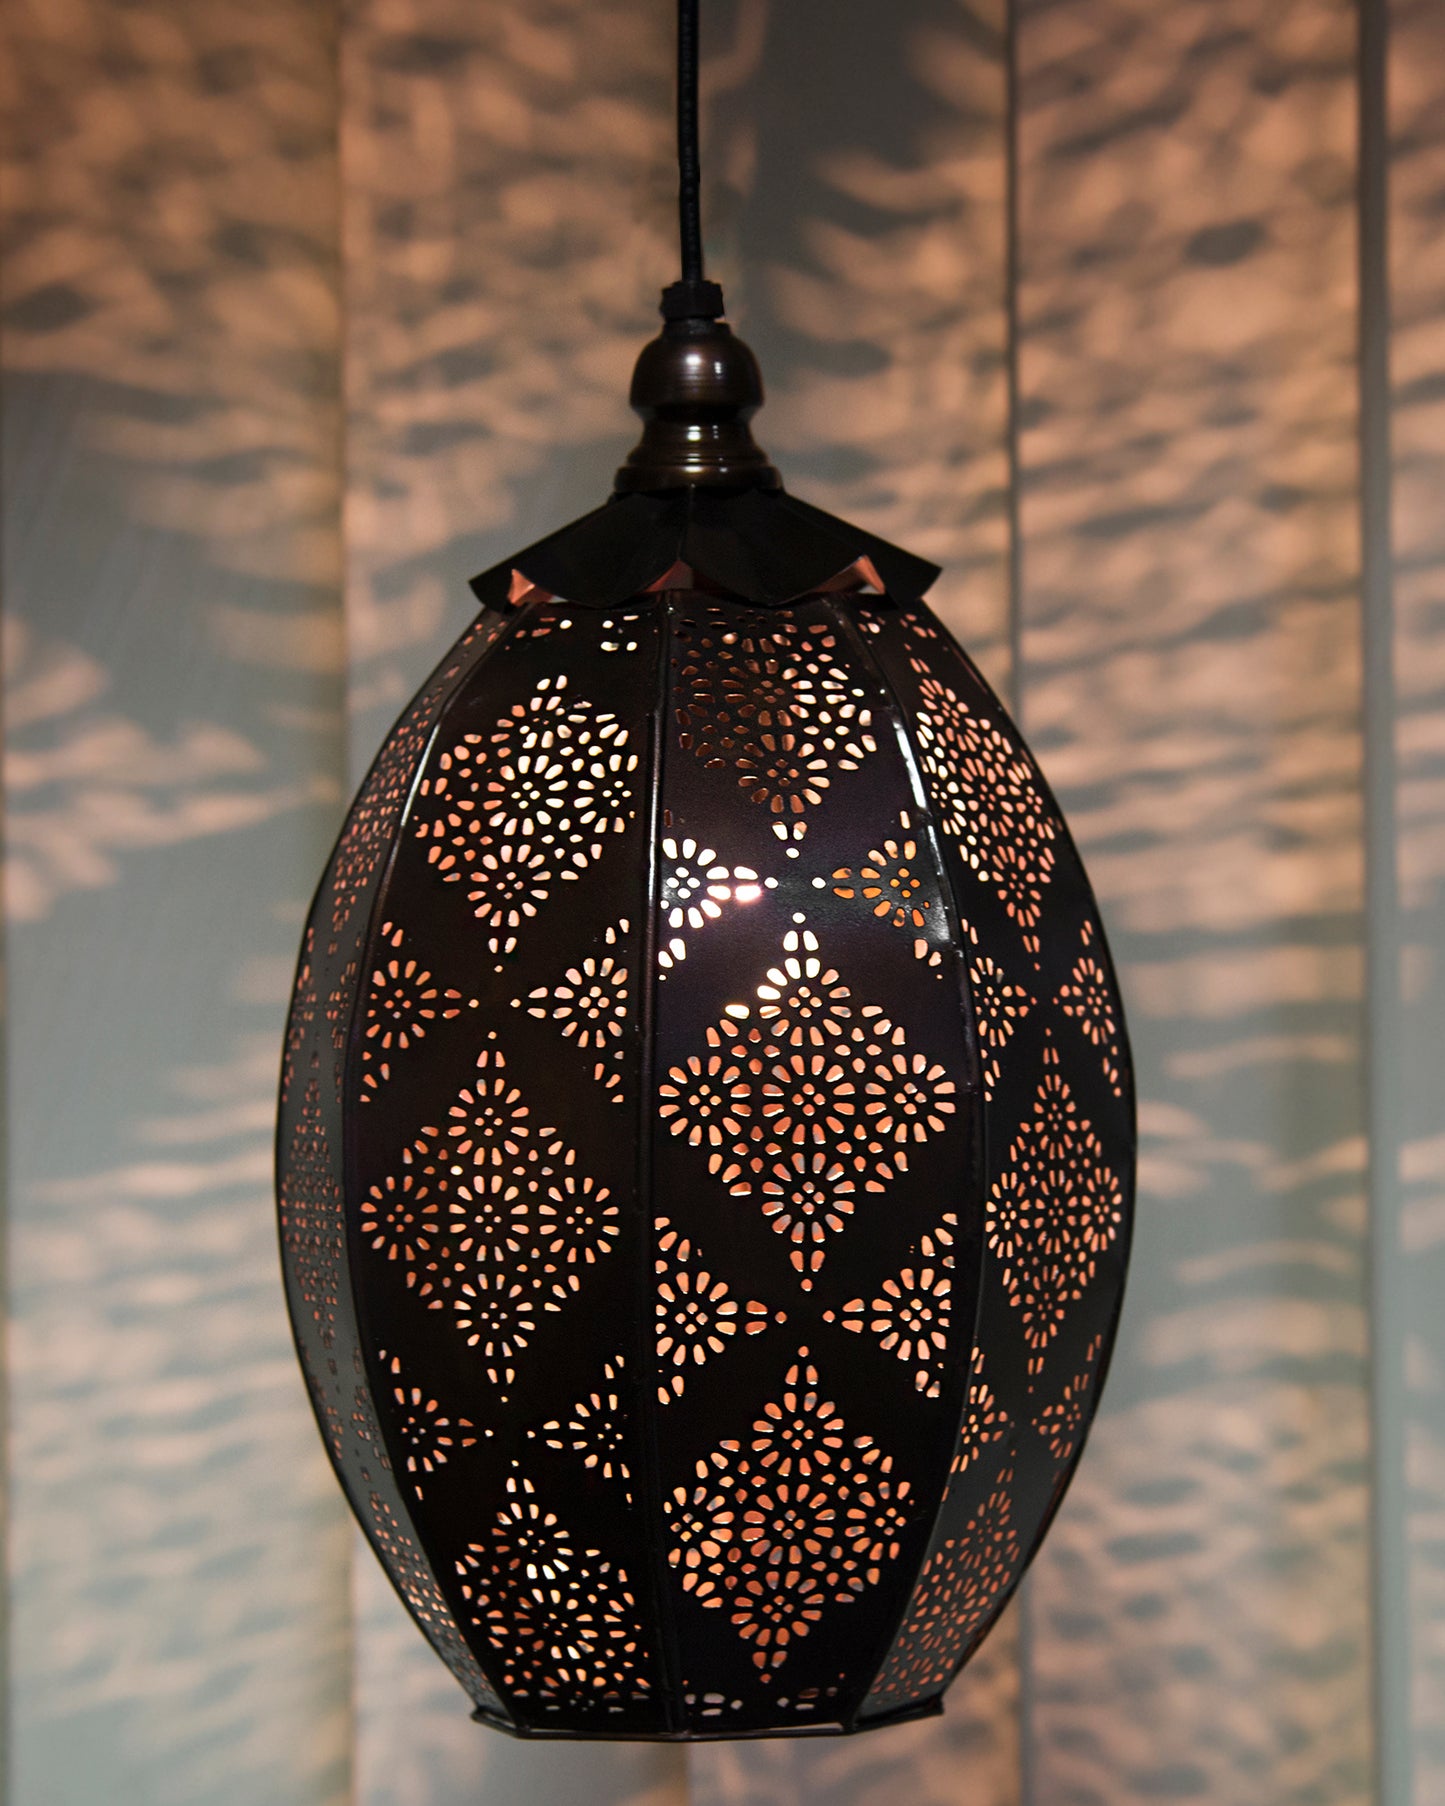 Antique Oval Moroccan hanging ceiling lamp, antique finish hanging pendant light